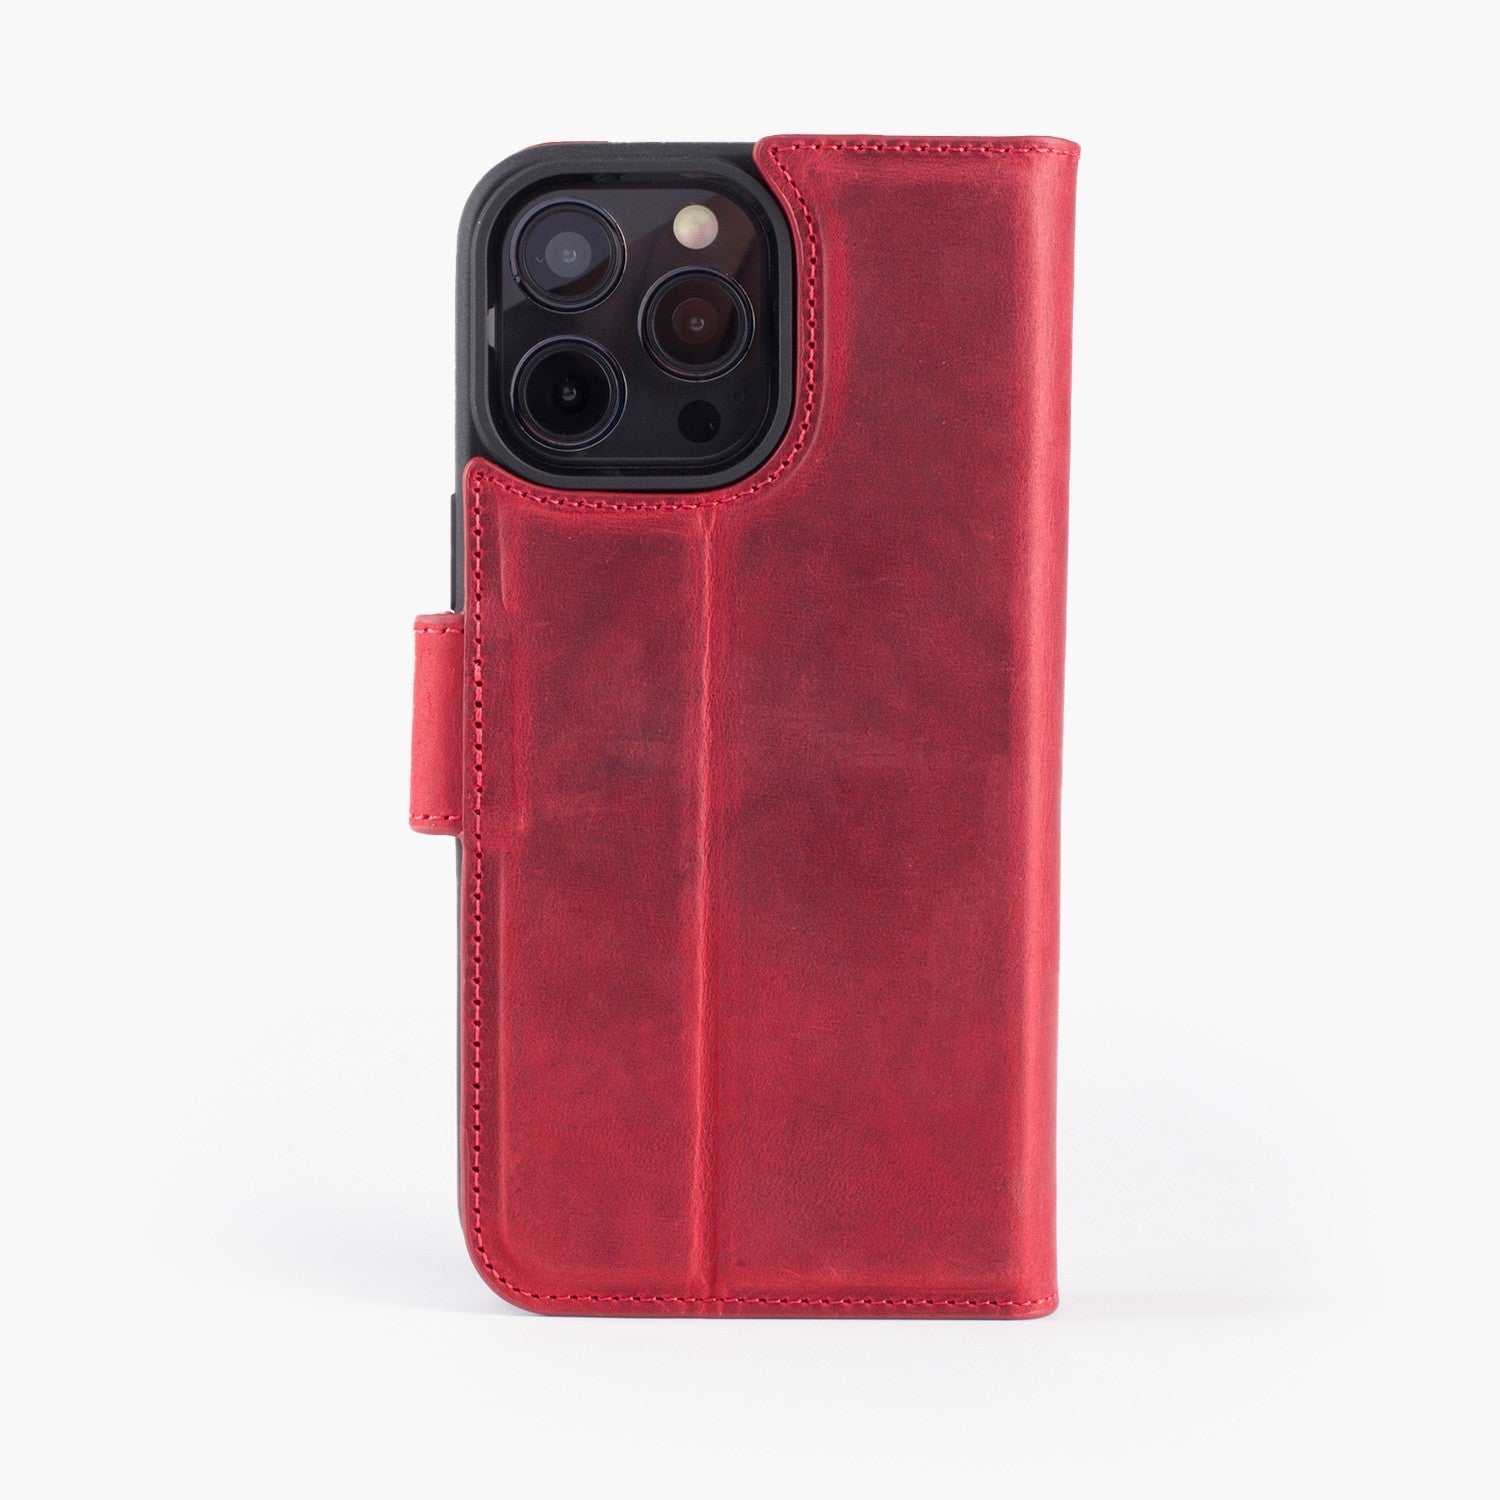 Wachikopa leather Magic Book Case 2 in 1 for iPhone 12 Pro Max Red